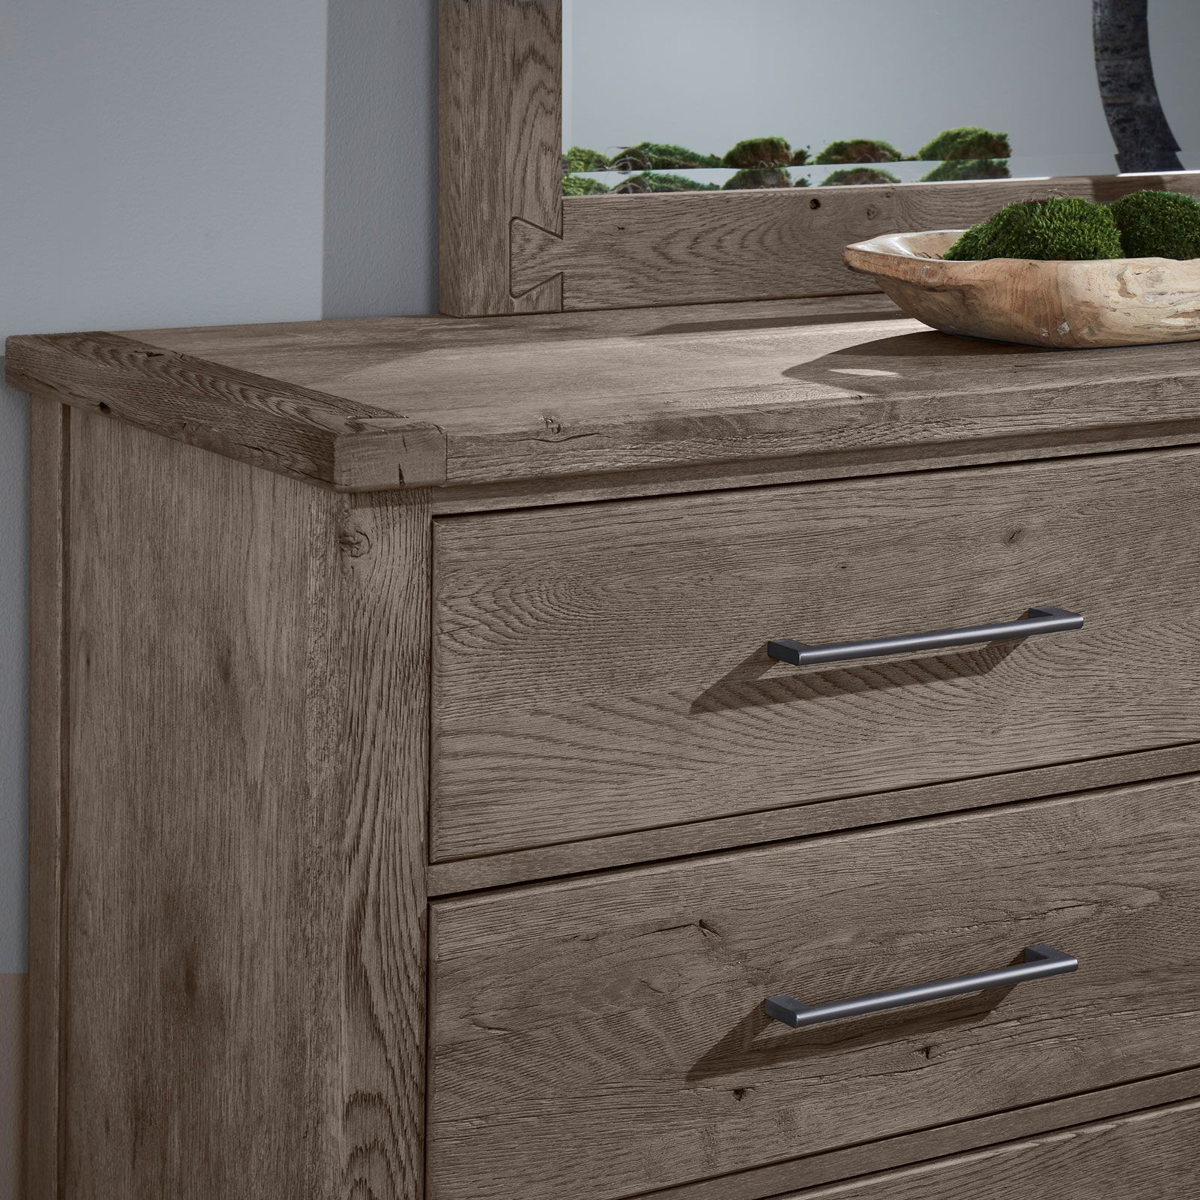 Picture of Mystic Gray Dovetail Dresser